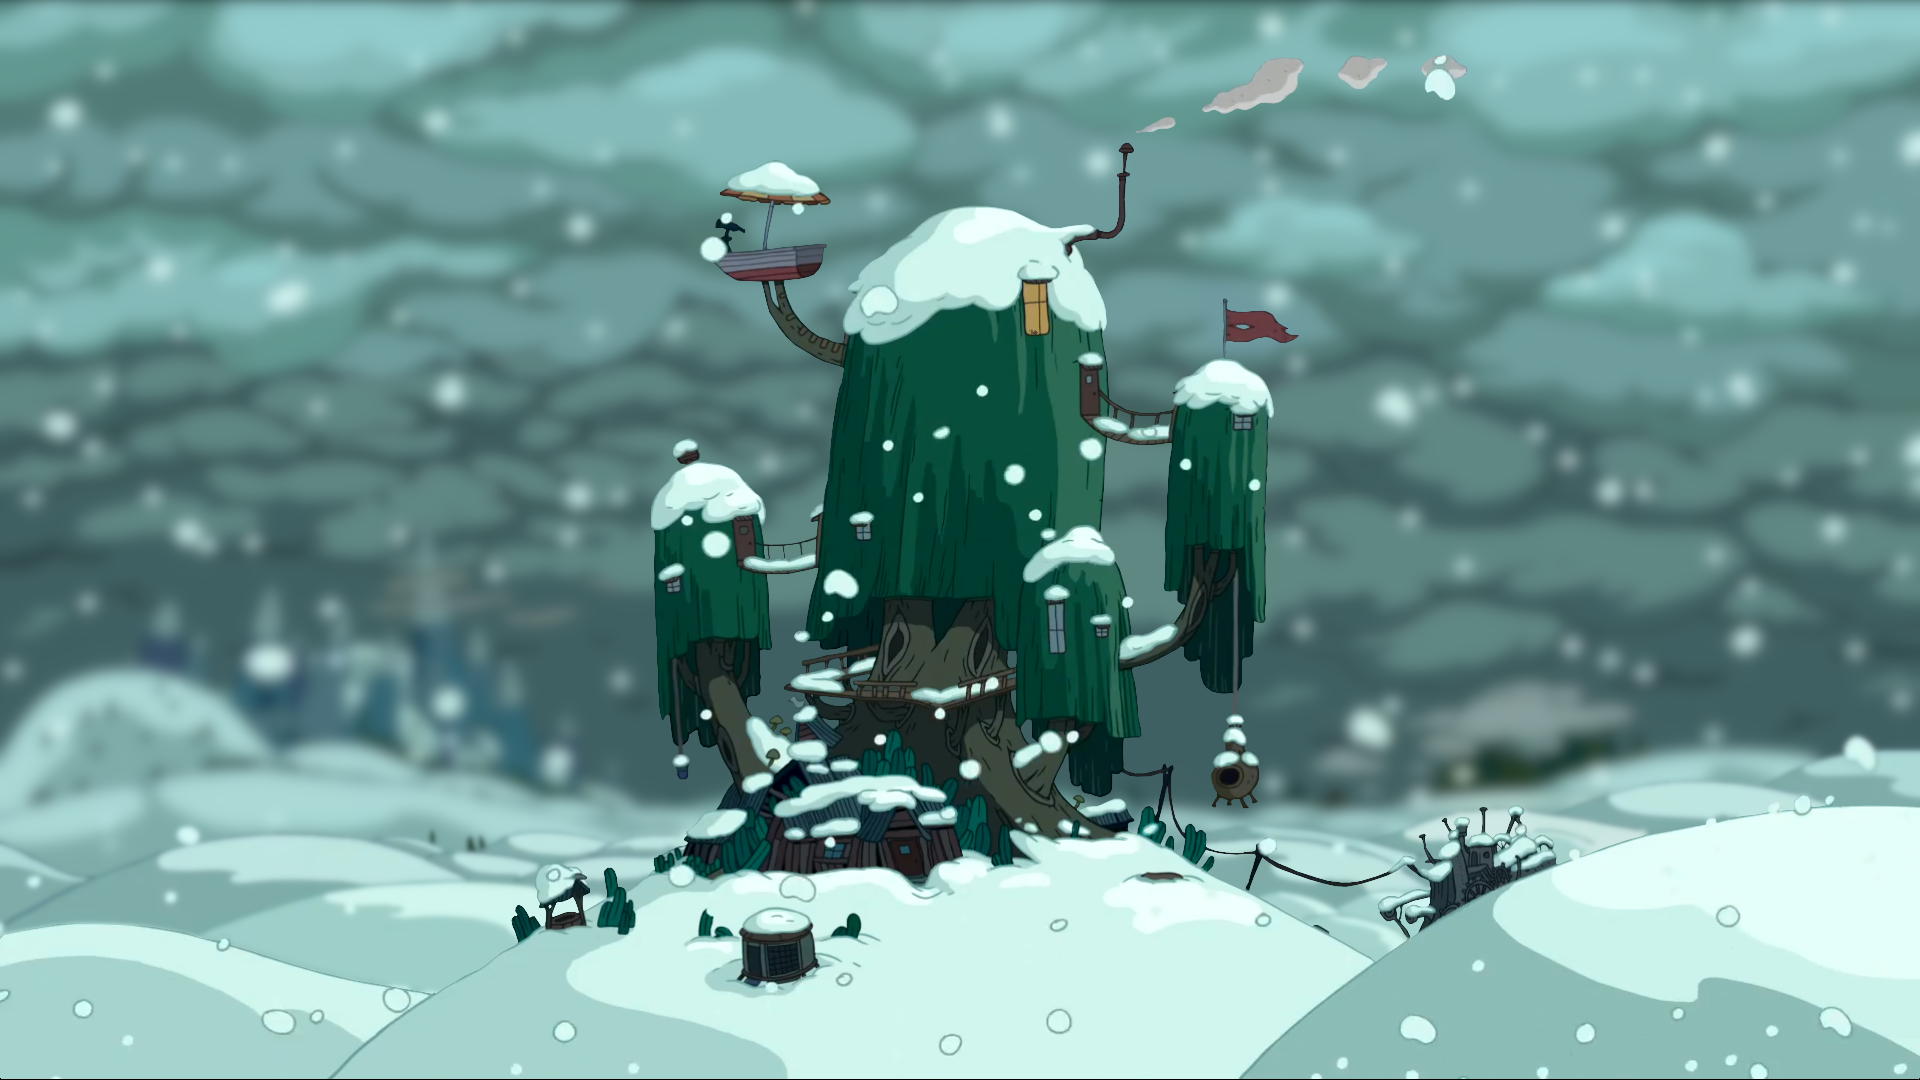 So I made a snowy background